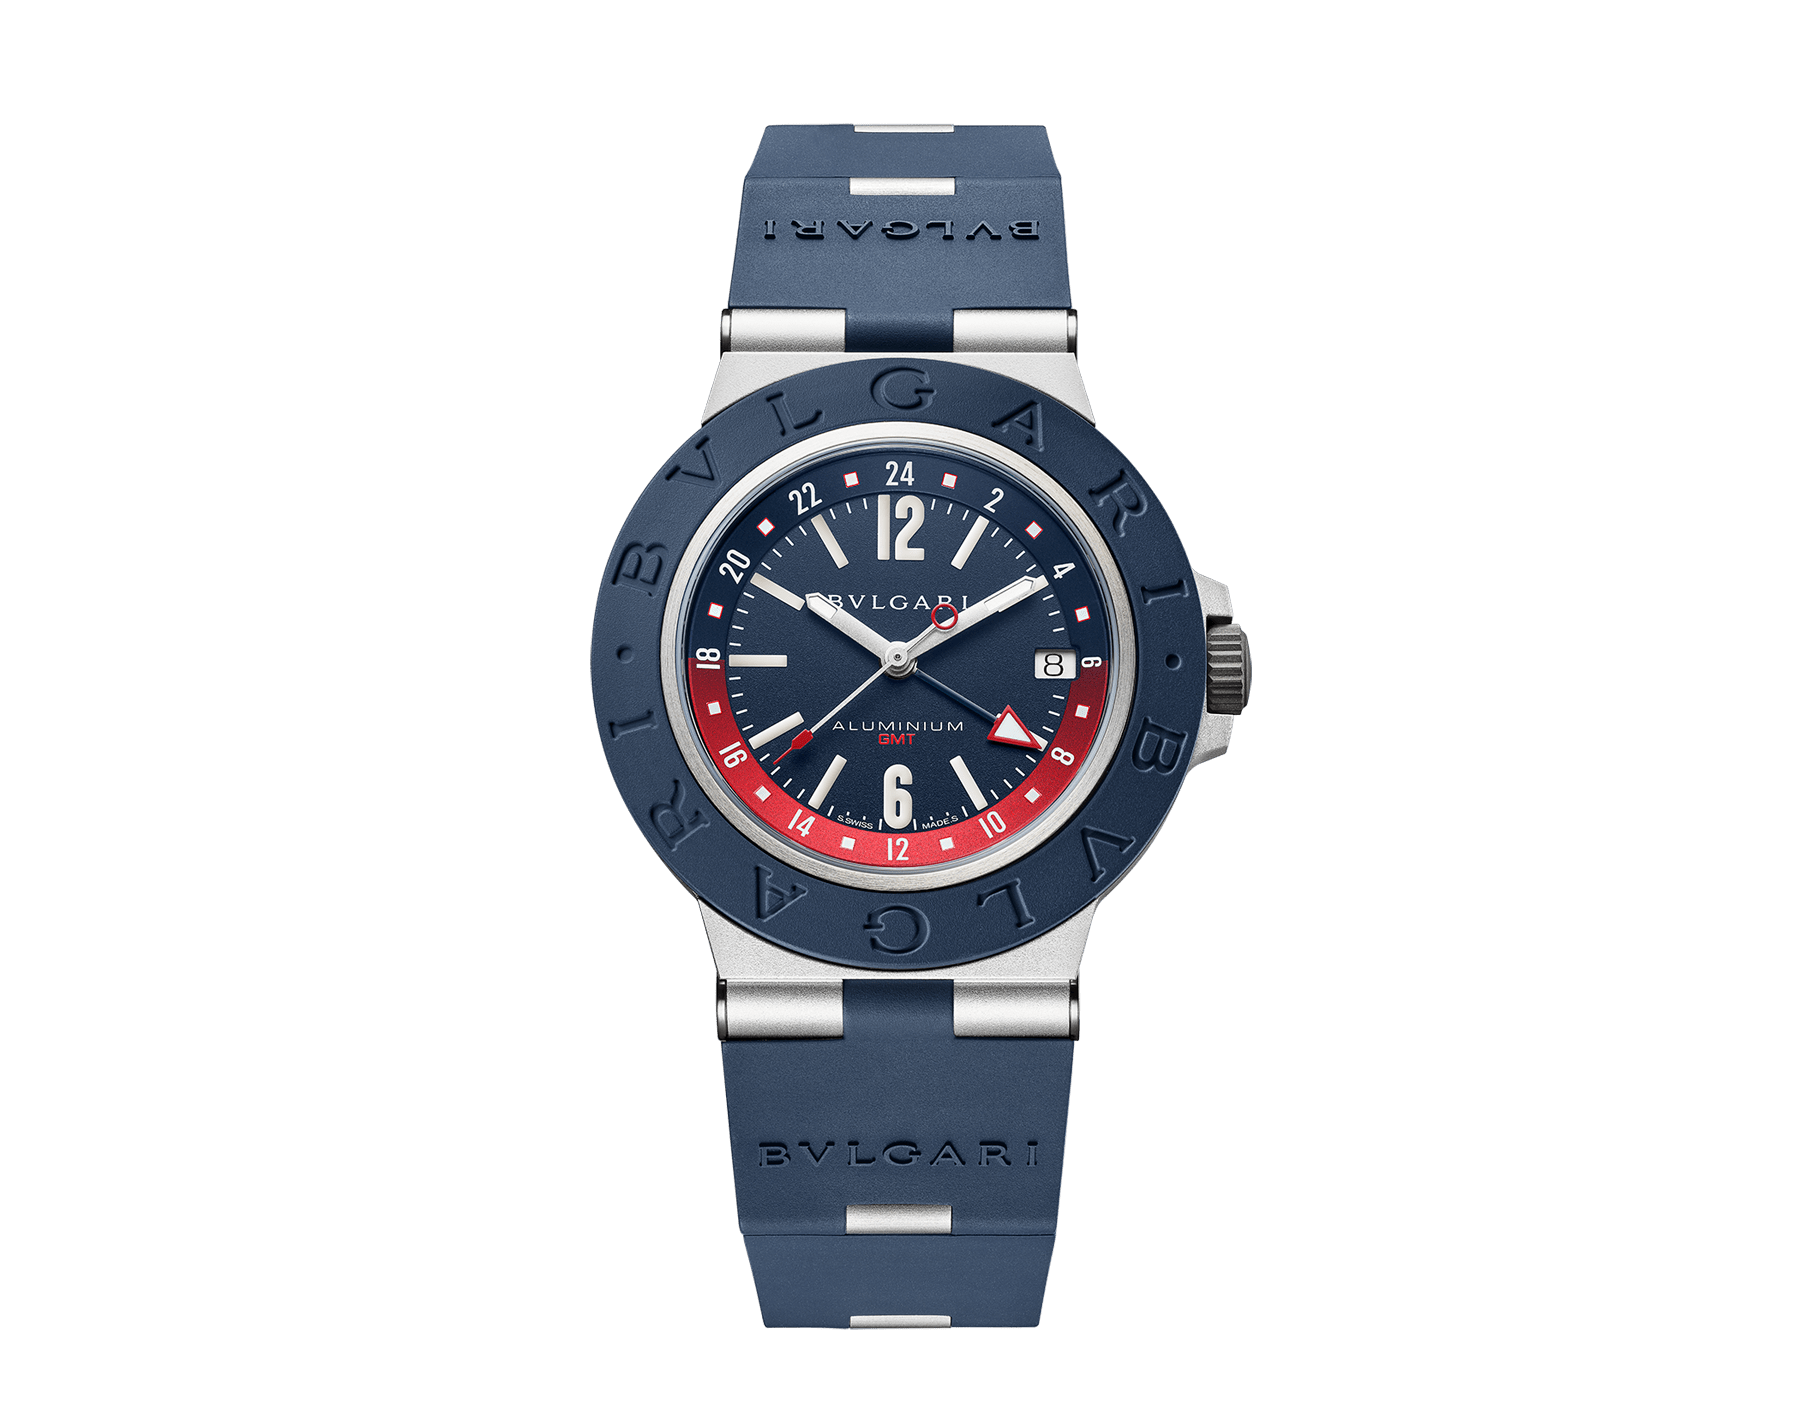 BVLGARI Aluminium GMT watch with mechanical movement, automatic winding, GMT 24h function, 40 mm aluminum case, blue rubber bezel with double logo engraving, blue dial, SLN indexes and hands, titanium caseback, aluminum links and blue rubber bracelet. Water-resistant up to 100 meters. 103554 image 1